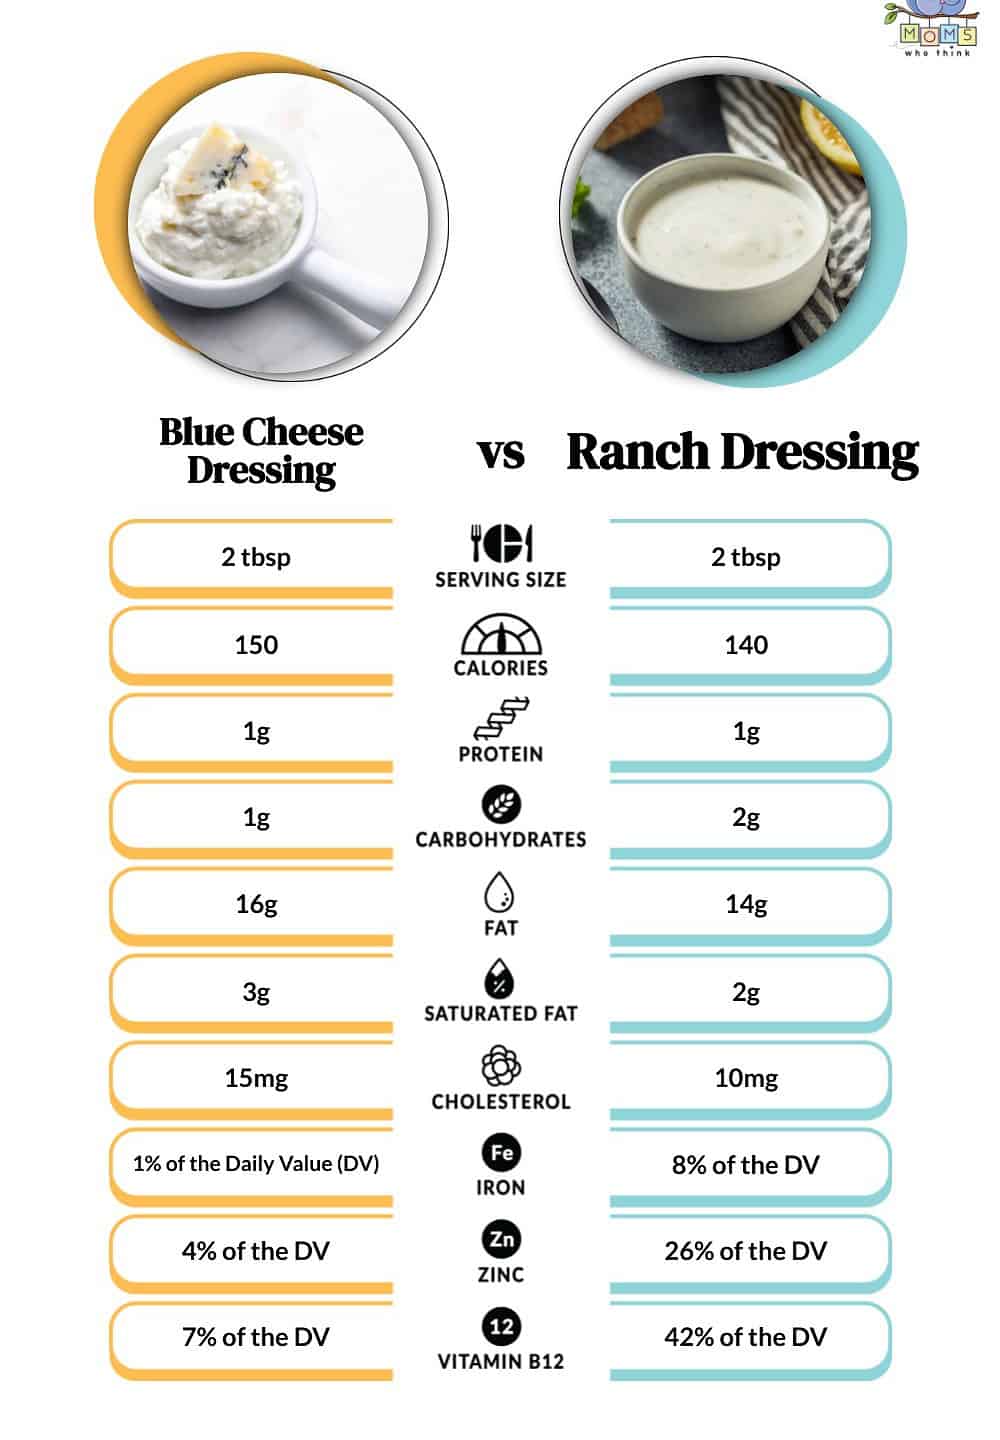 Blue Cheese Dressing vs Ranch Dressing Nutrition Comparison